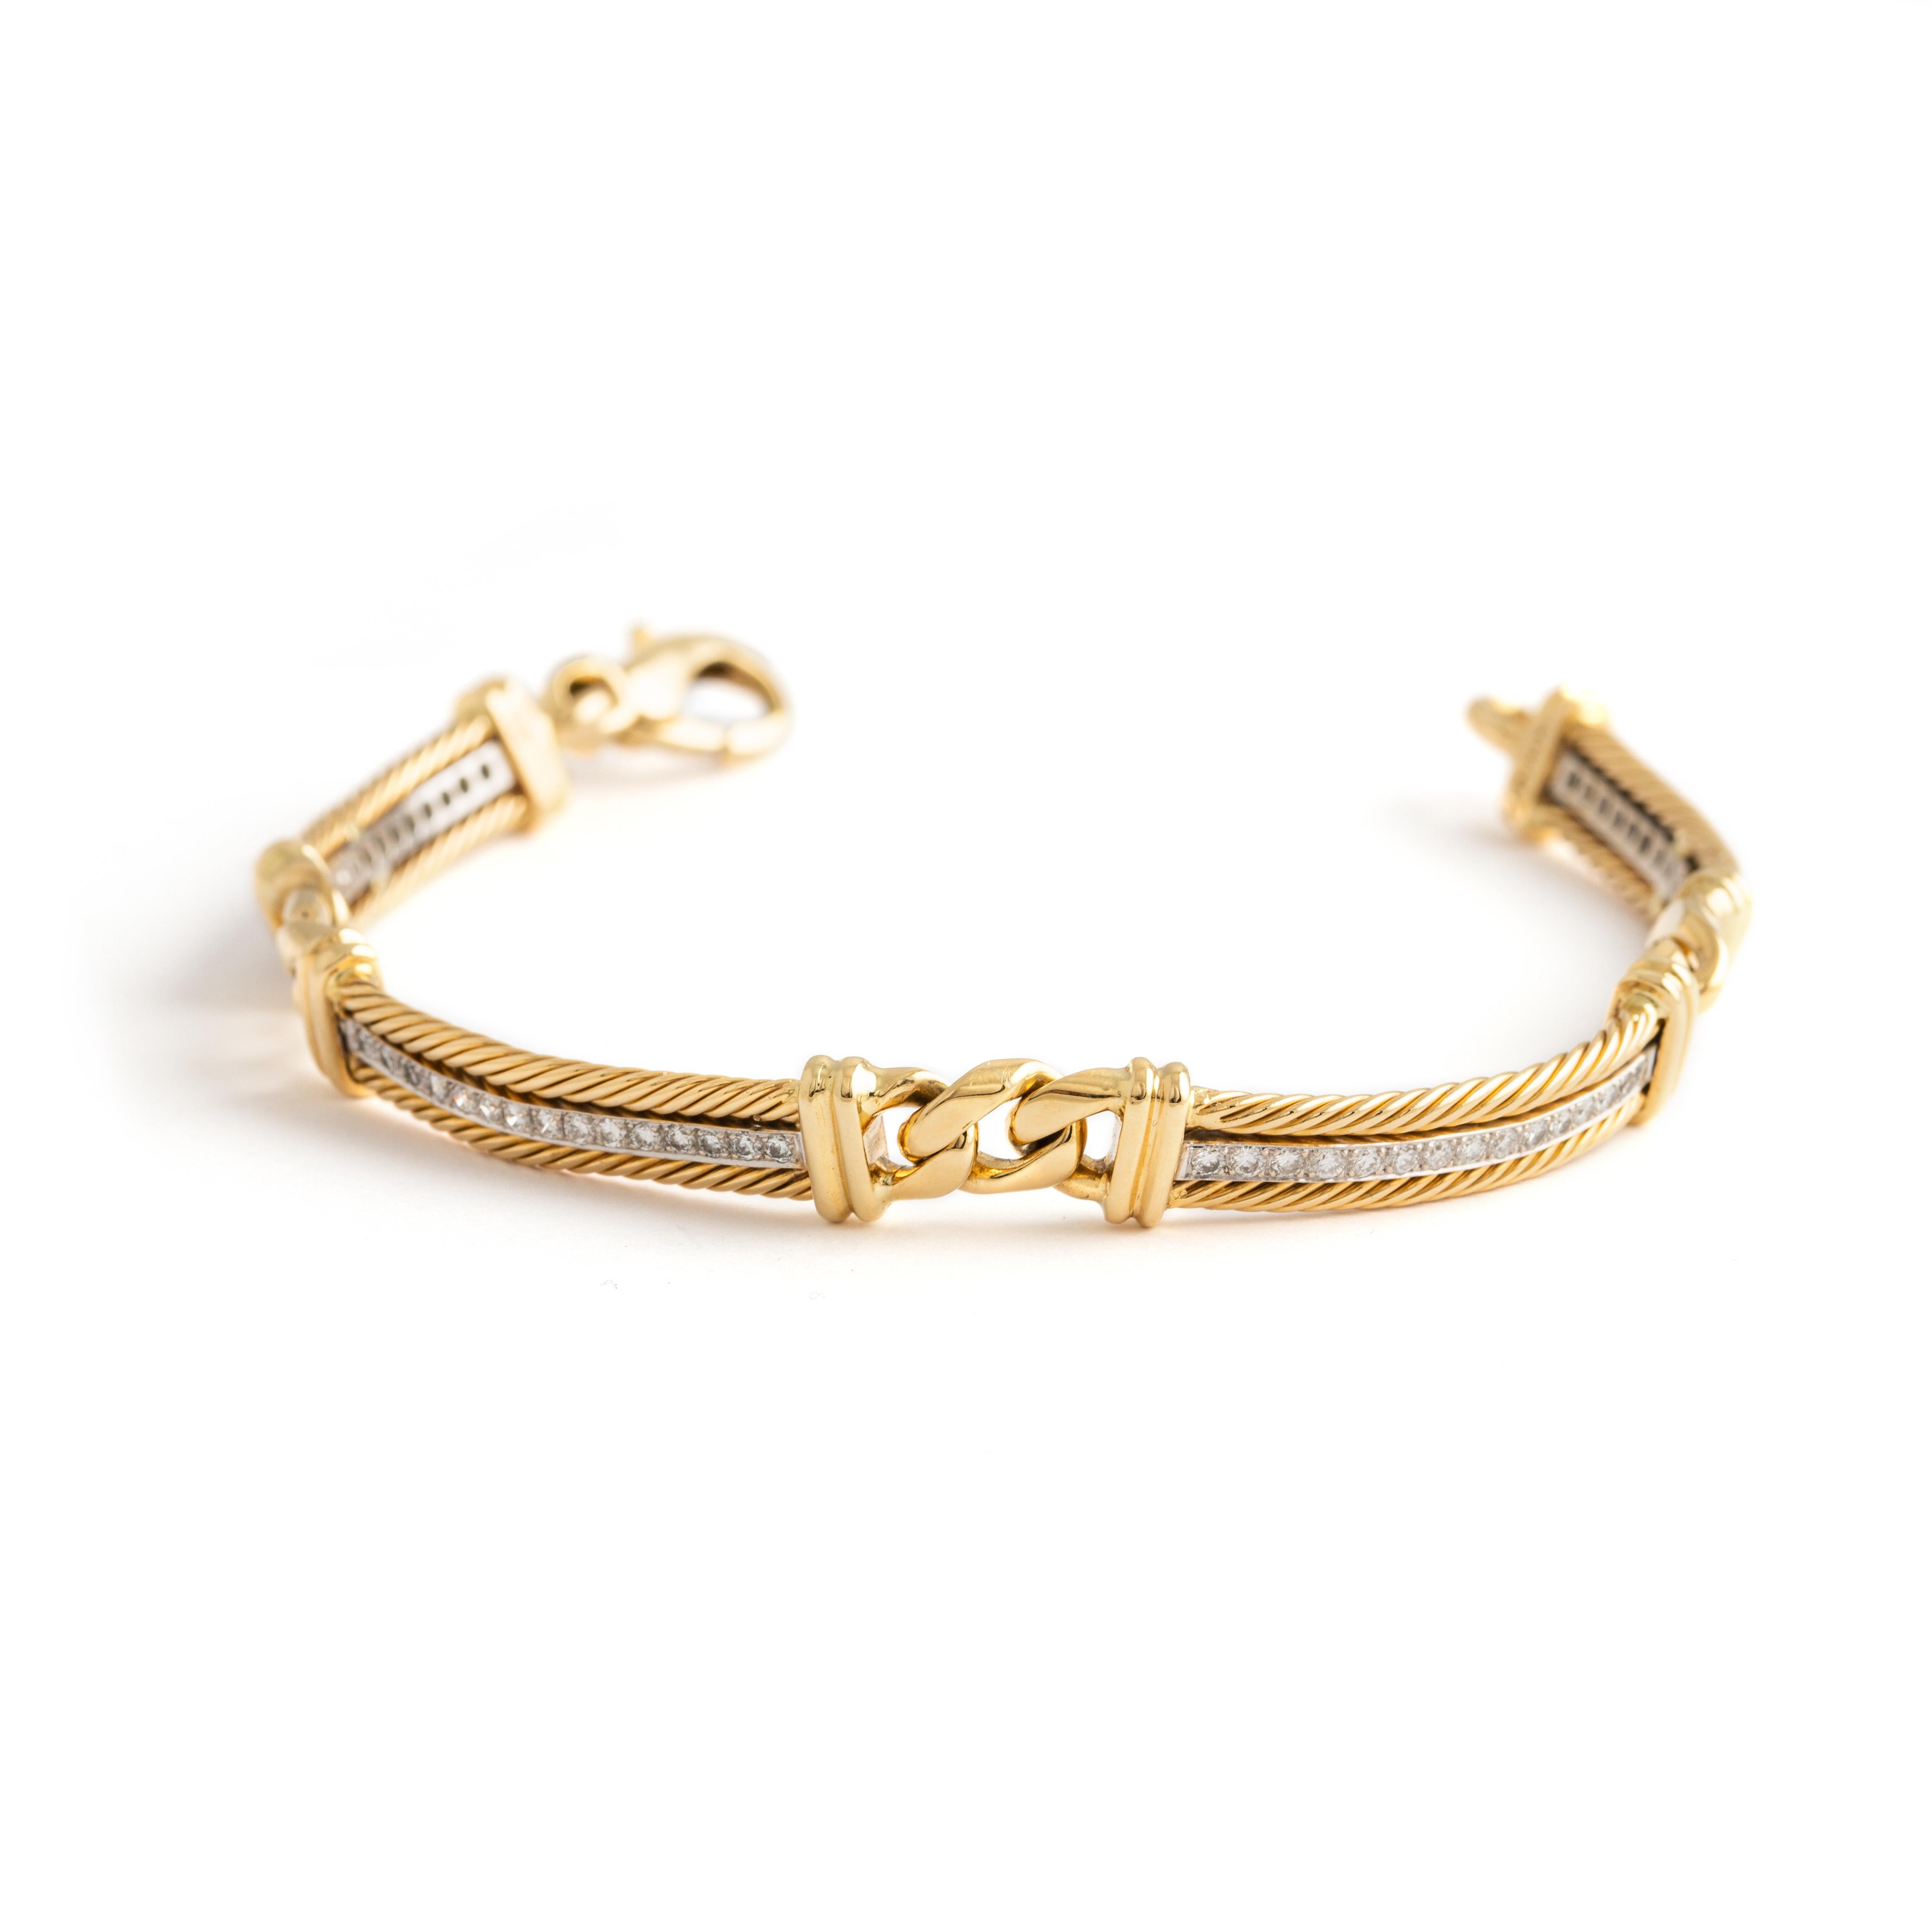 Diamond (not tested) White and Yellow Gold Bracelet
Signed Padani.

Length: approx. 17.50 centimeters.

Total gross weight: 28.23 grams.